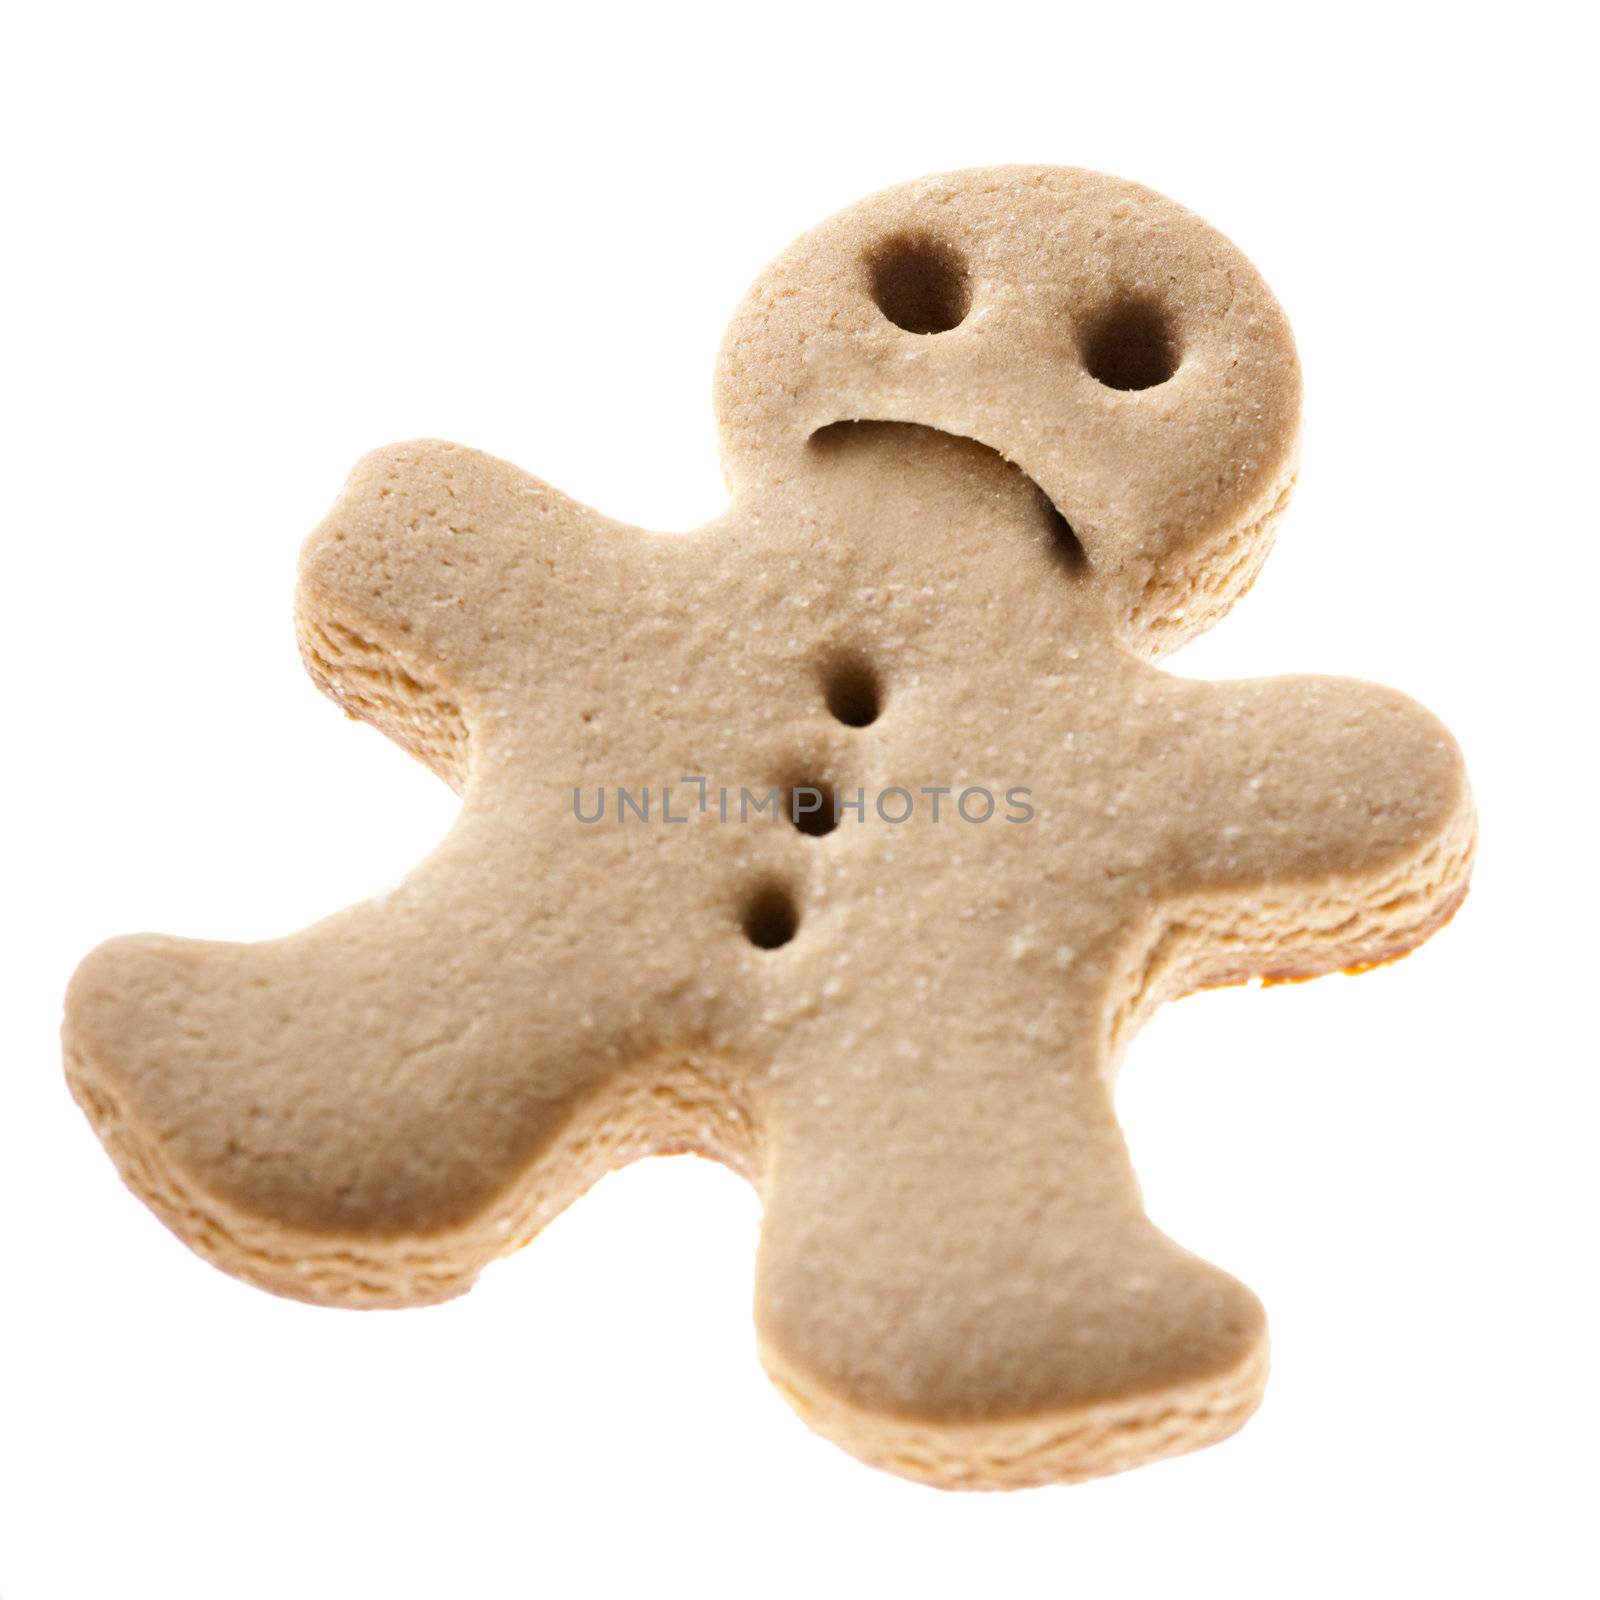 Homemade Gingerbread man cookie with a sad expression isolated on white background